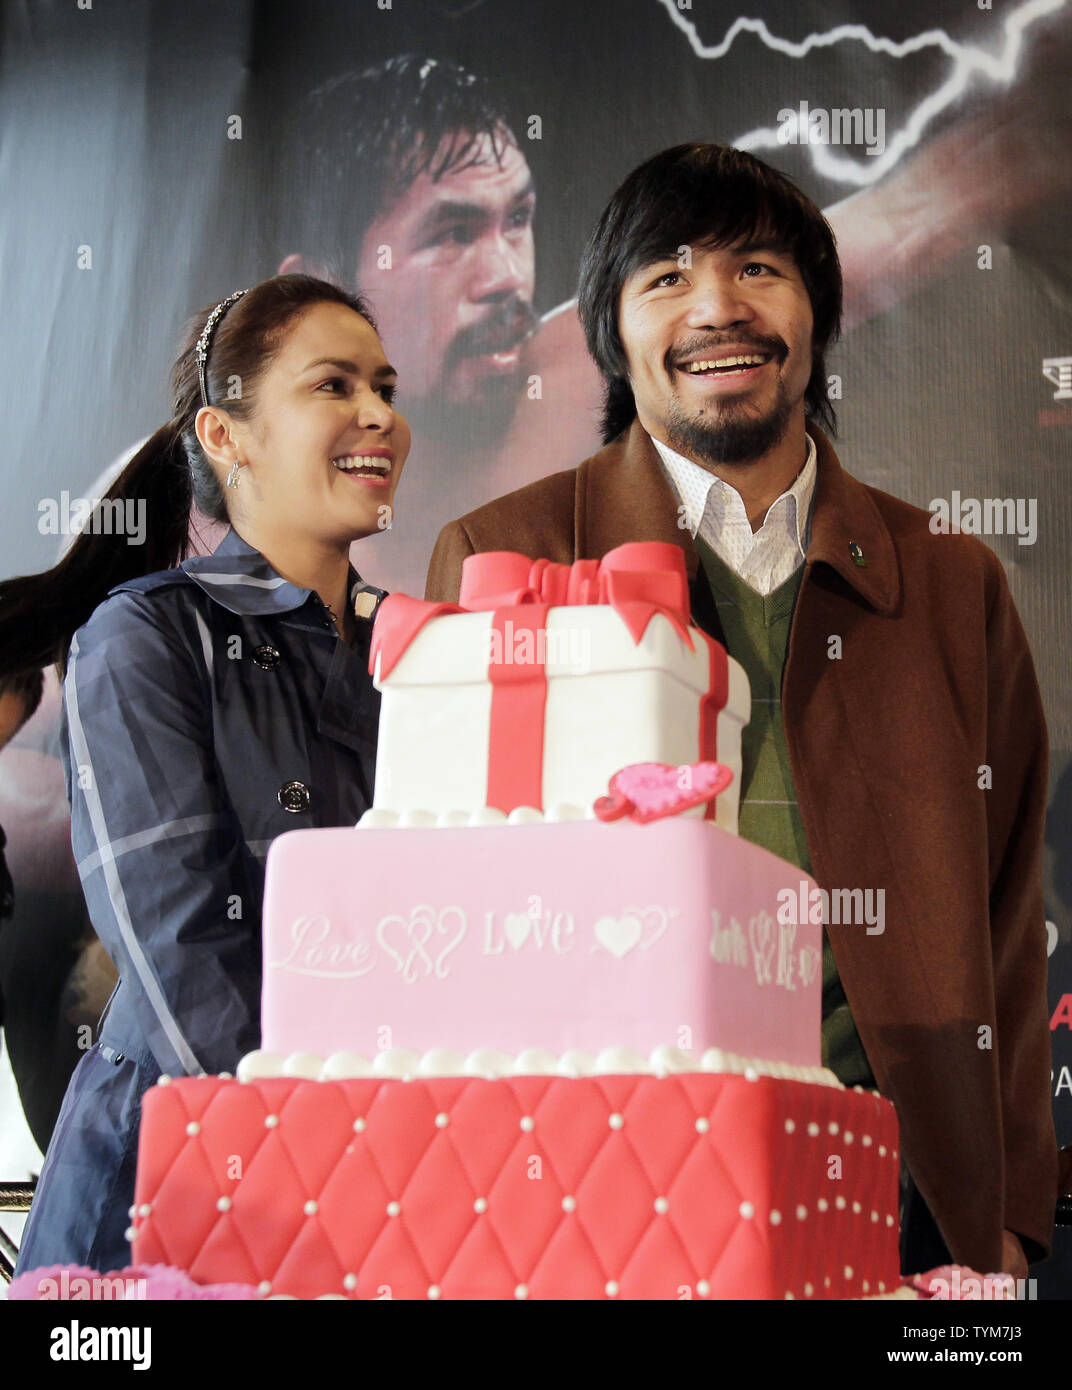 Manny and Jinkee Pacquiao stand next to a Valentines Day cake at a press conference to promote the upcoming fight between Manny Pacquiao and Shane Mosley at the MGM Grand in Las Vegas at Chelsea Piers on Valentines Day in New York City on February 14, 2011.       UPI/John Angelillo Stock Photo